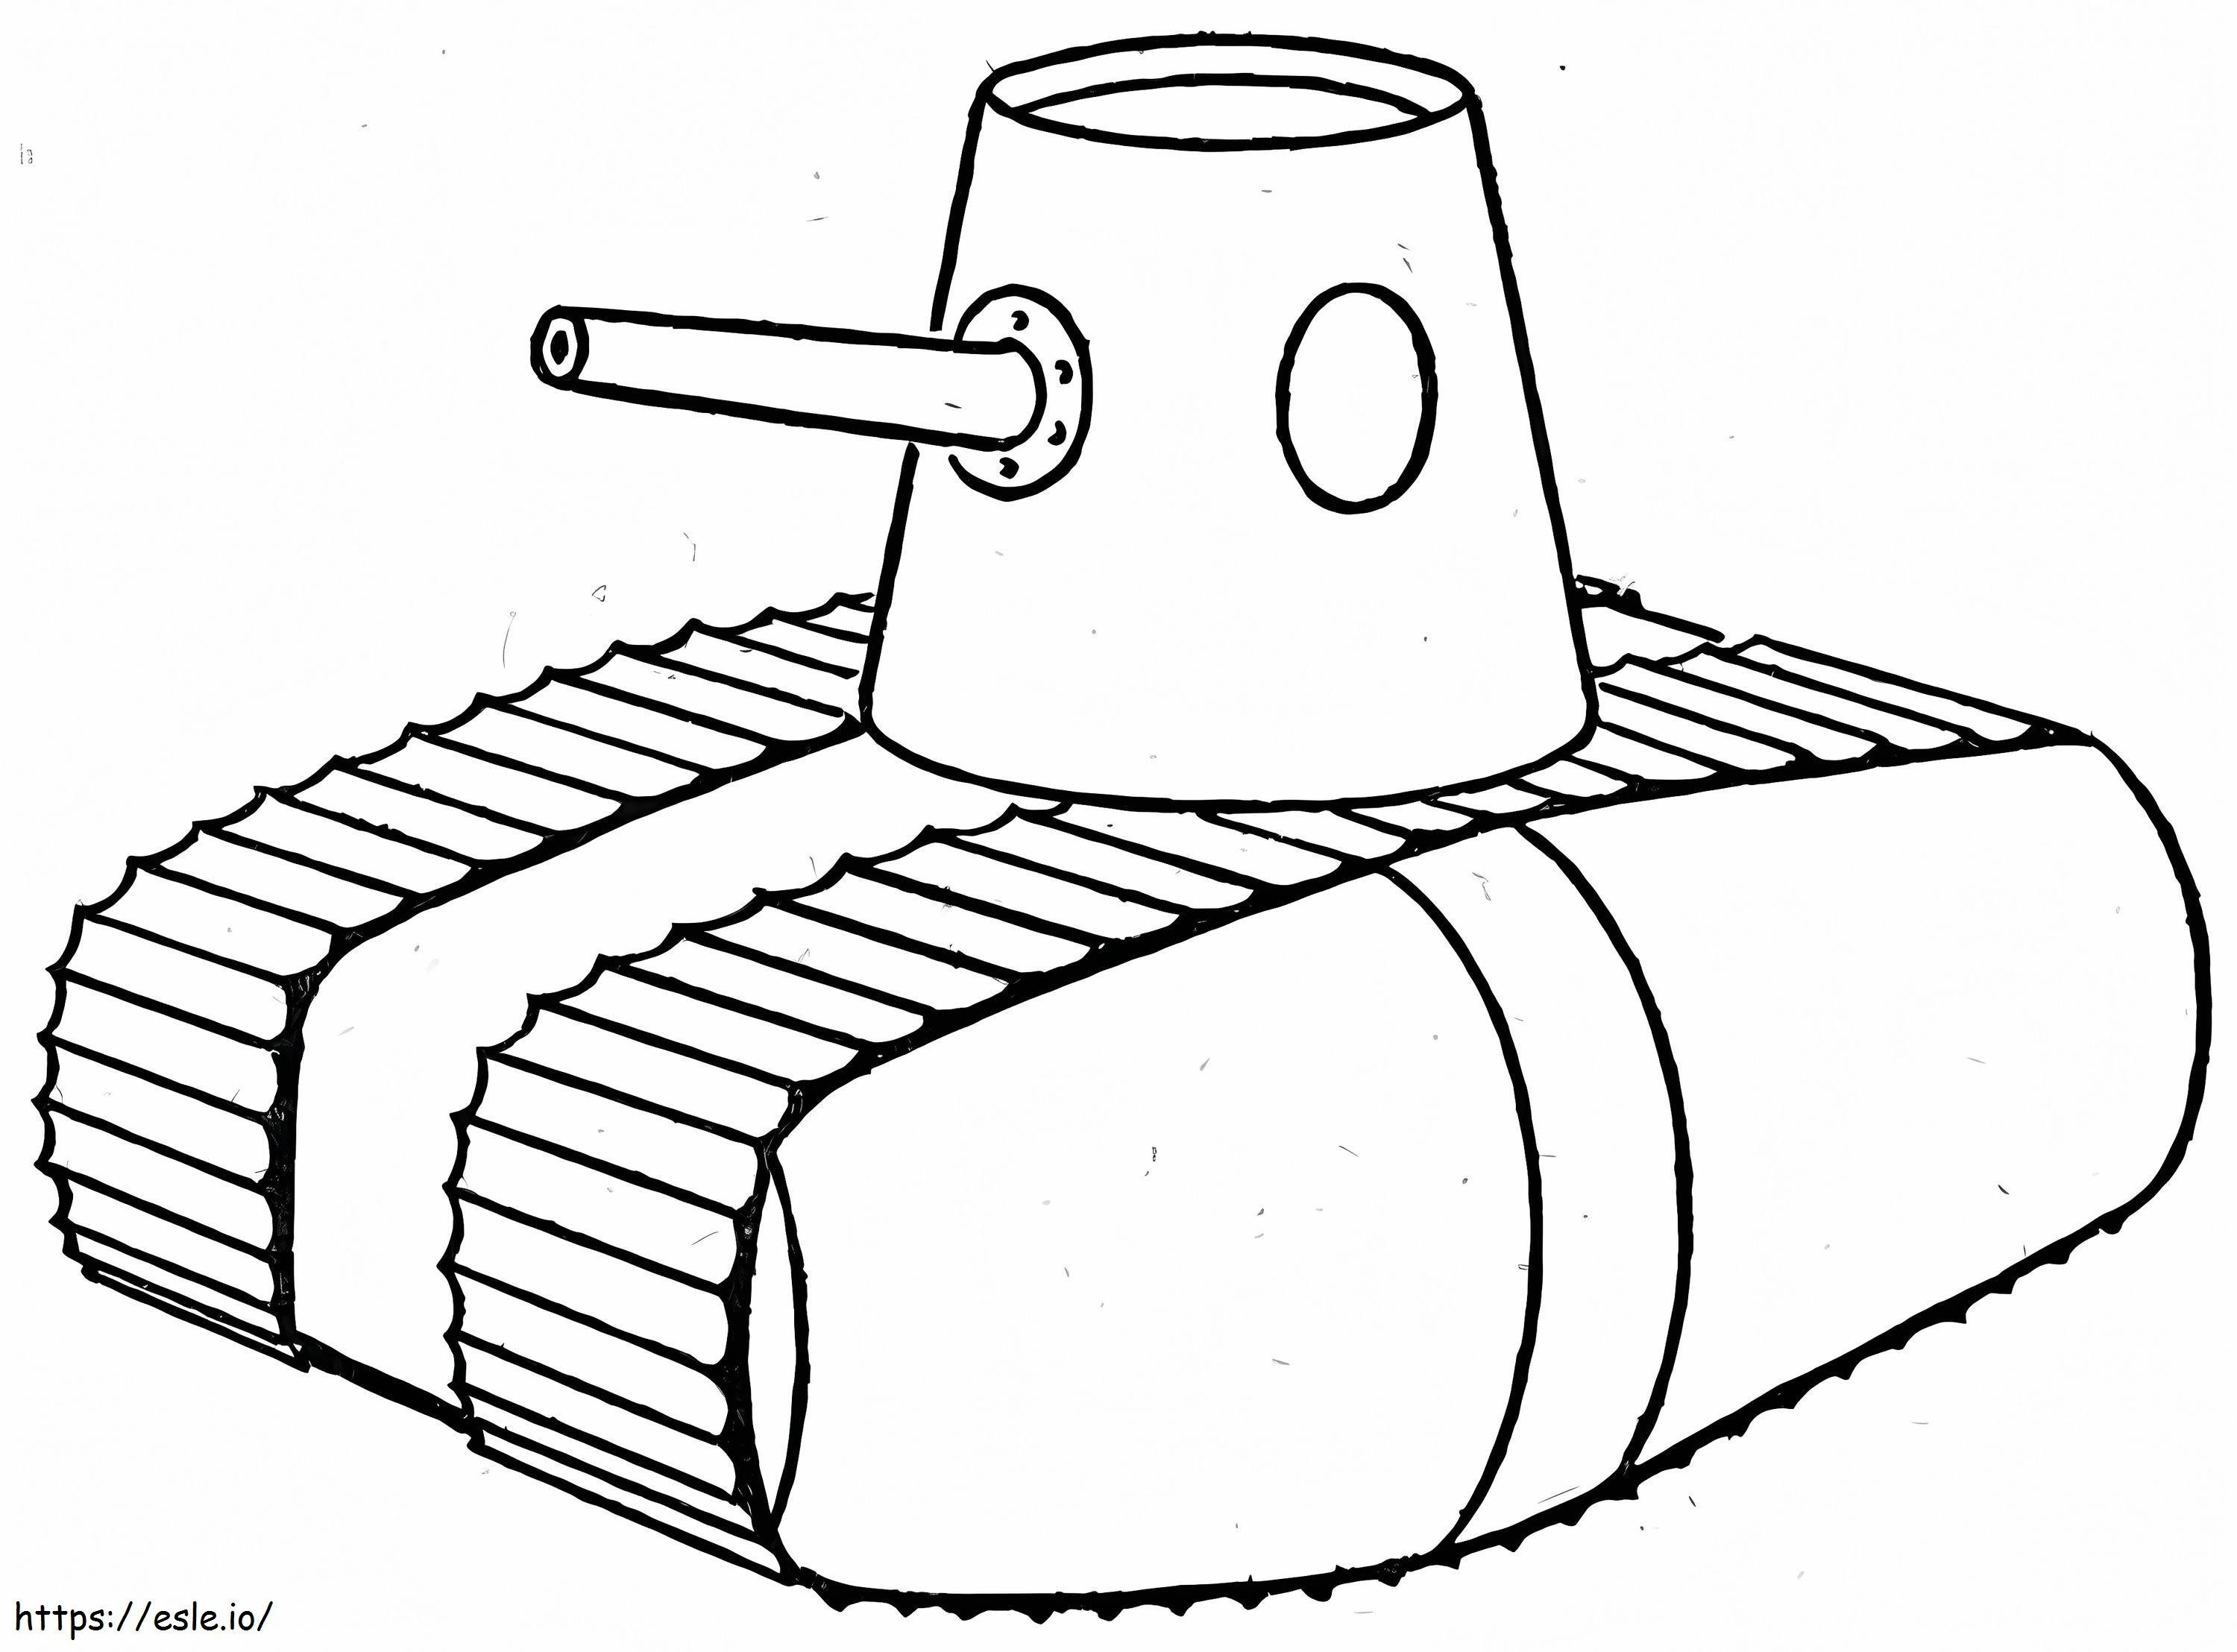 WW1 Style Tank coloring page